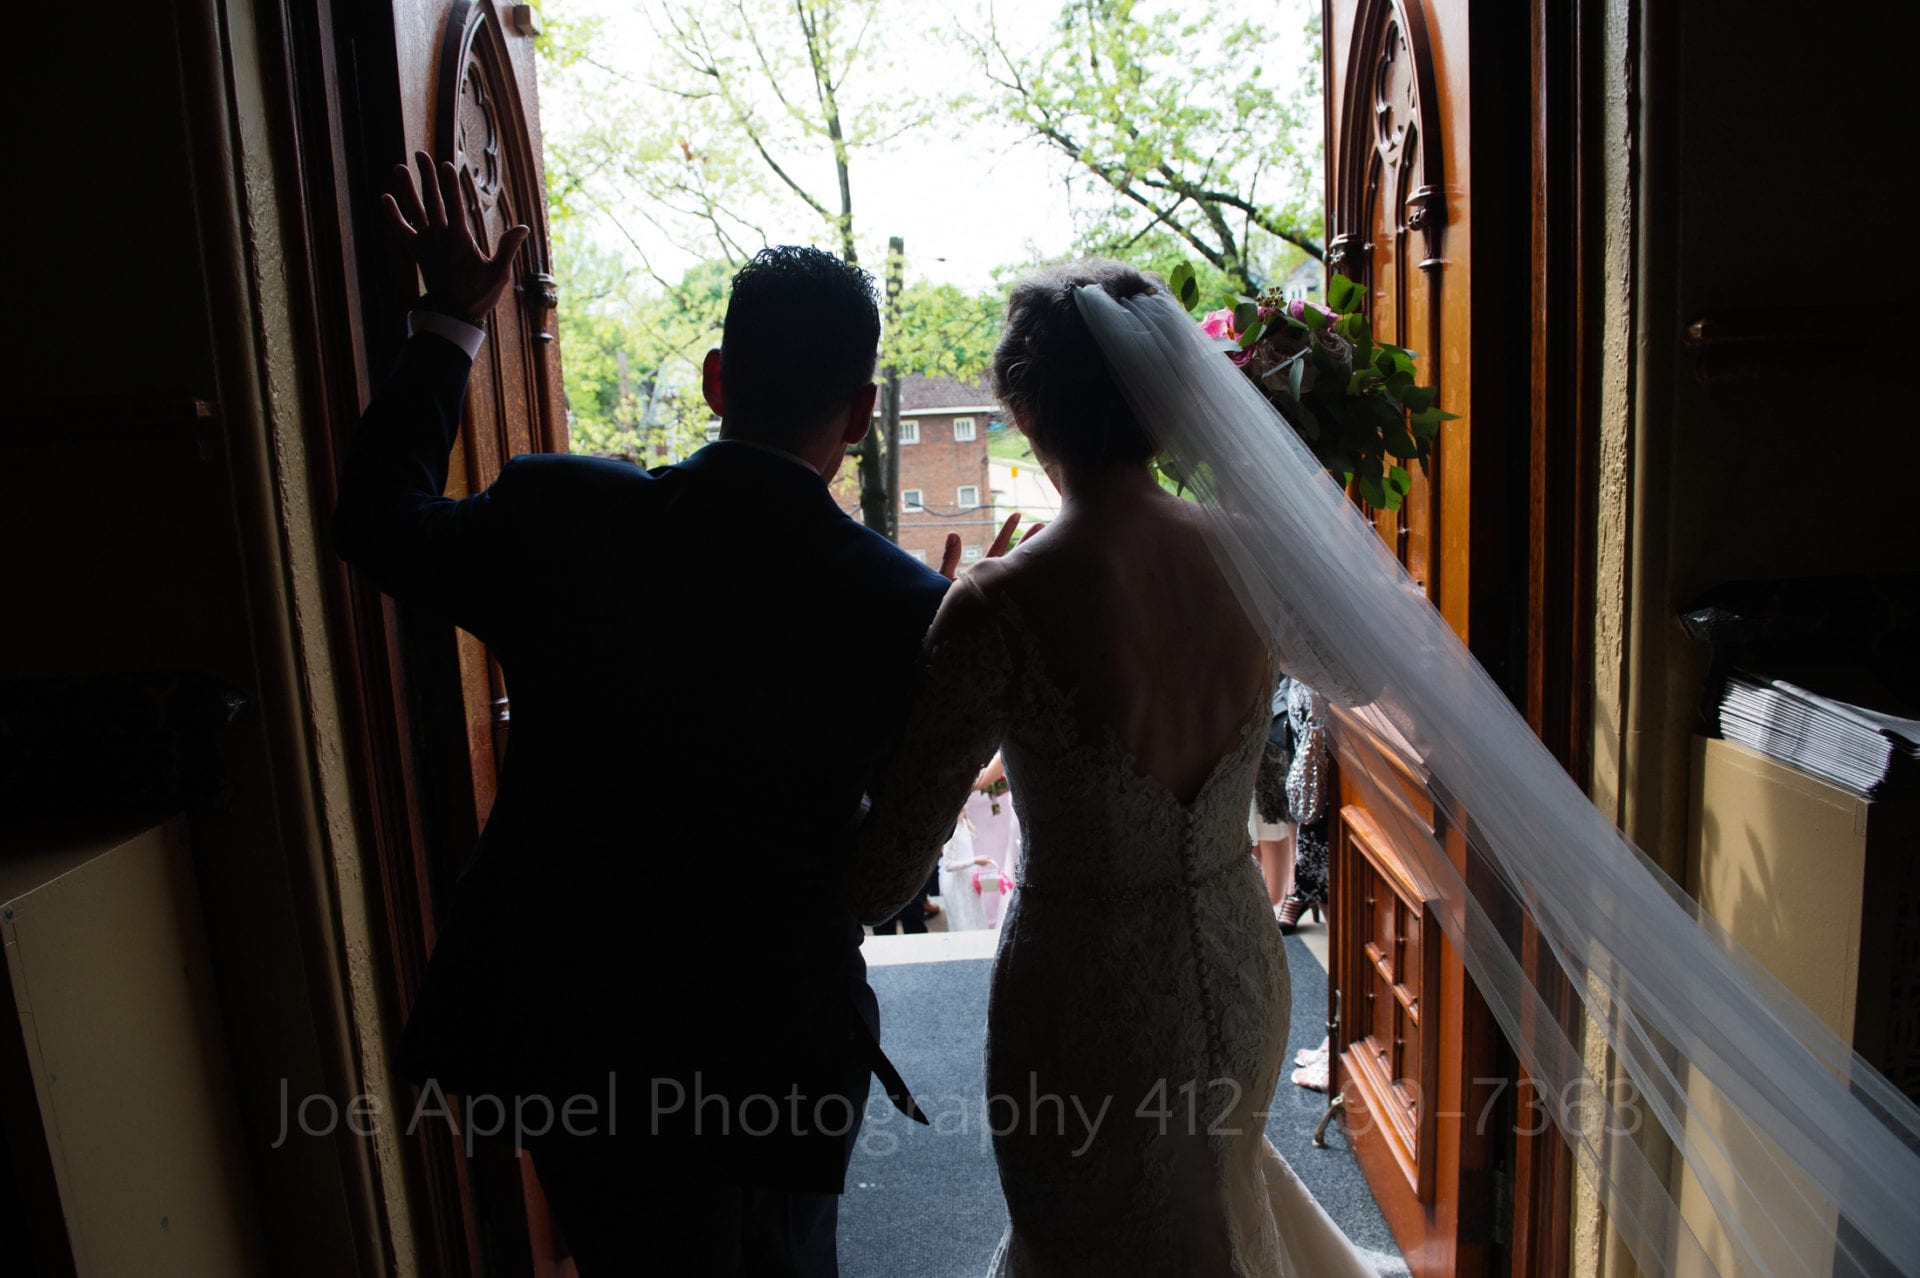 Bride and groom in silhouette as they walk out of the doors of the church after their wedding.